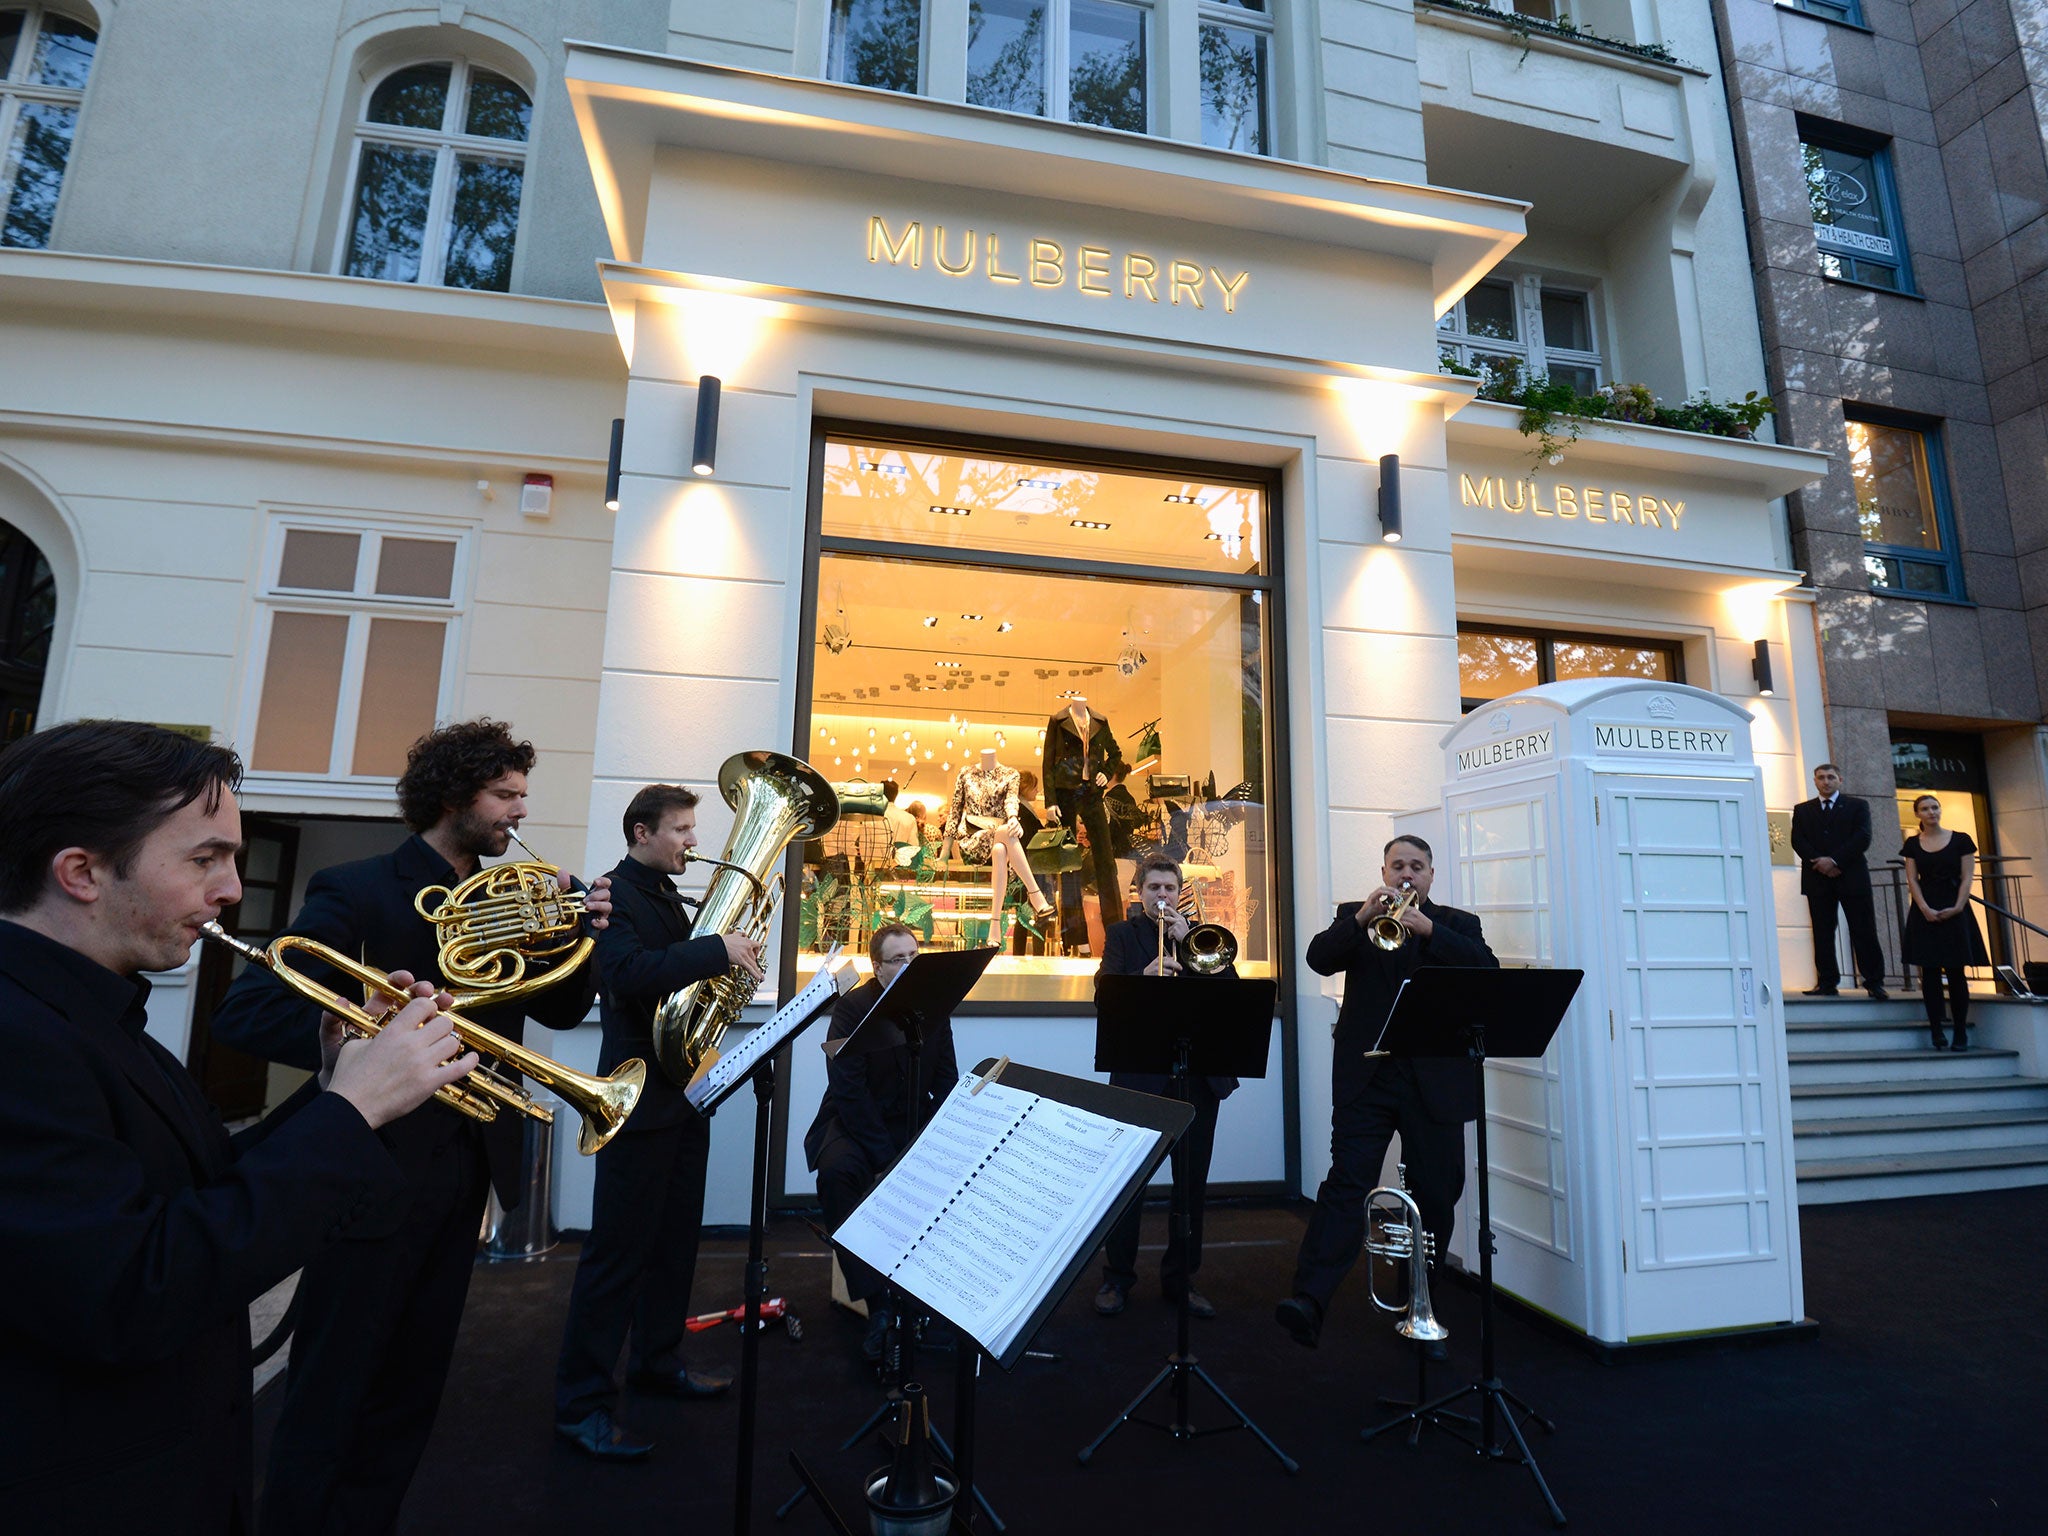 A general view at the Mulberry cocktail party in Berlin's flagship store at Mulberry Store on September 19, 2013 in Berlin, Germany.